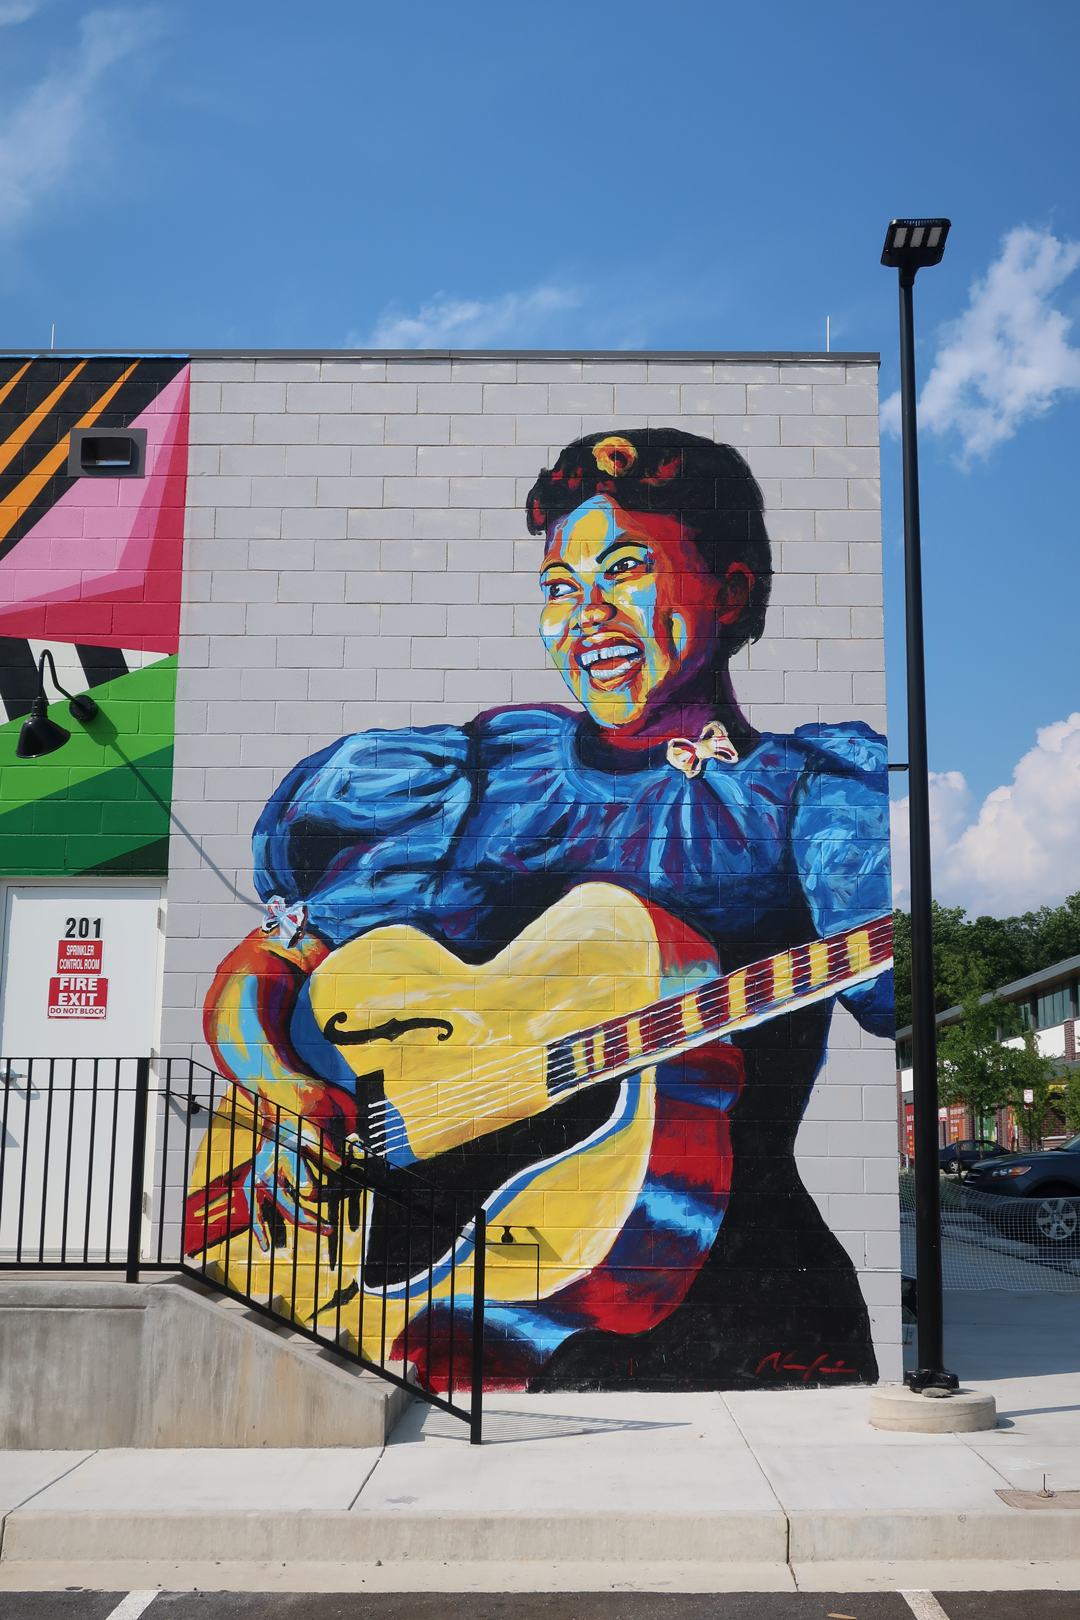 "Portrait of Innovation: Sister Rosetta Tharpe" created by Noah Scalin for the 2018 Greengate Festival in Short Pump